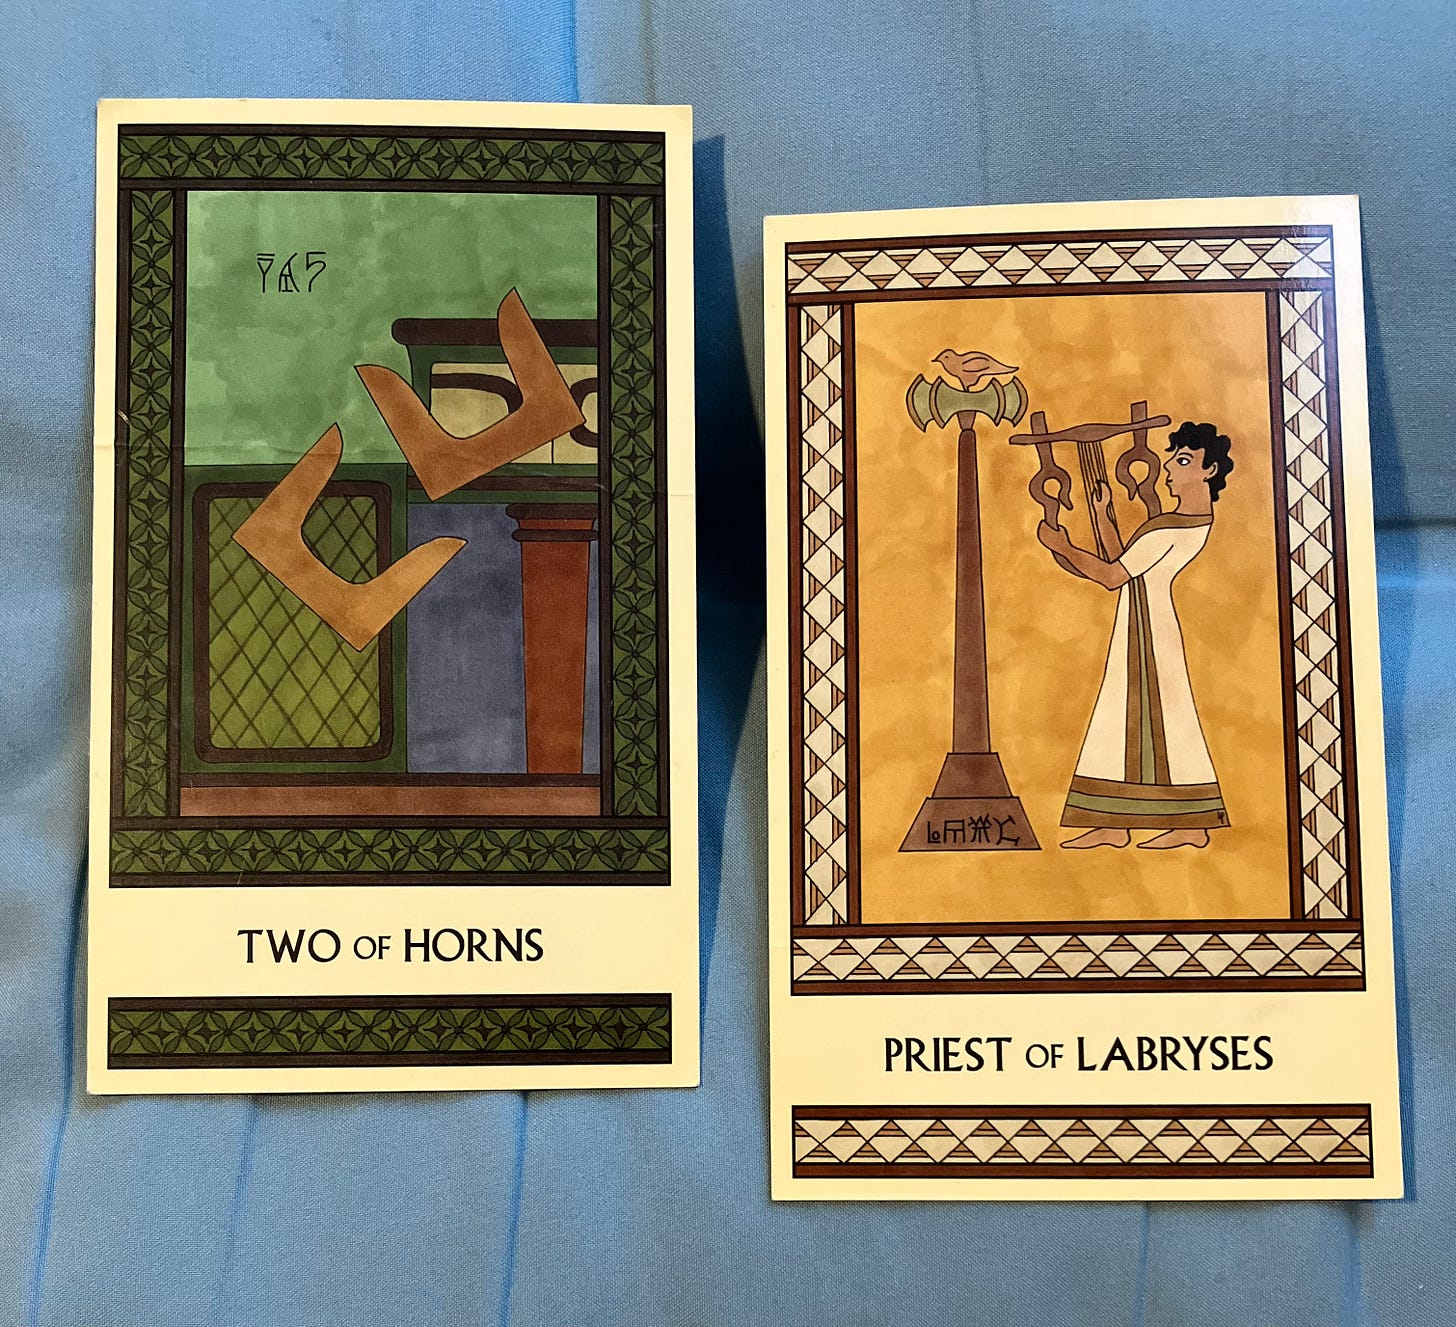 Two Minoan Tarot cards side by side on a grayish-blue background. The Two of Horns is in shades of green and brown and shows two pairs of Minoan sacred horns tumbling off a shrine. The Priest of Labryses is in shades of gold, cream, and tan and shows a Minoan man in a long robe, facing left, playing a lyre in front of a tall labrys.